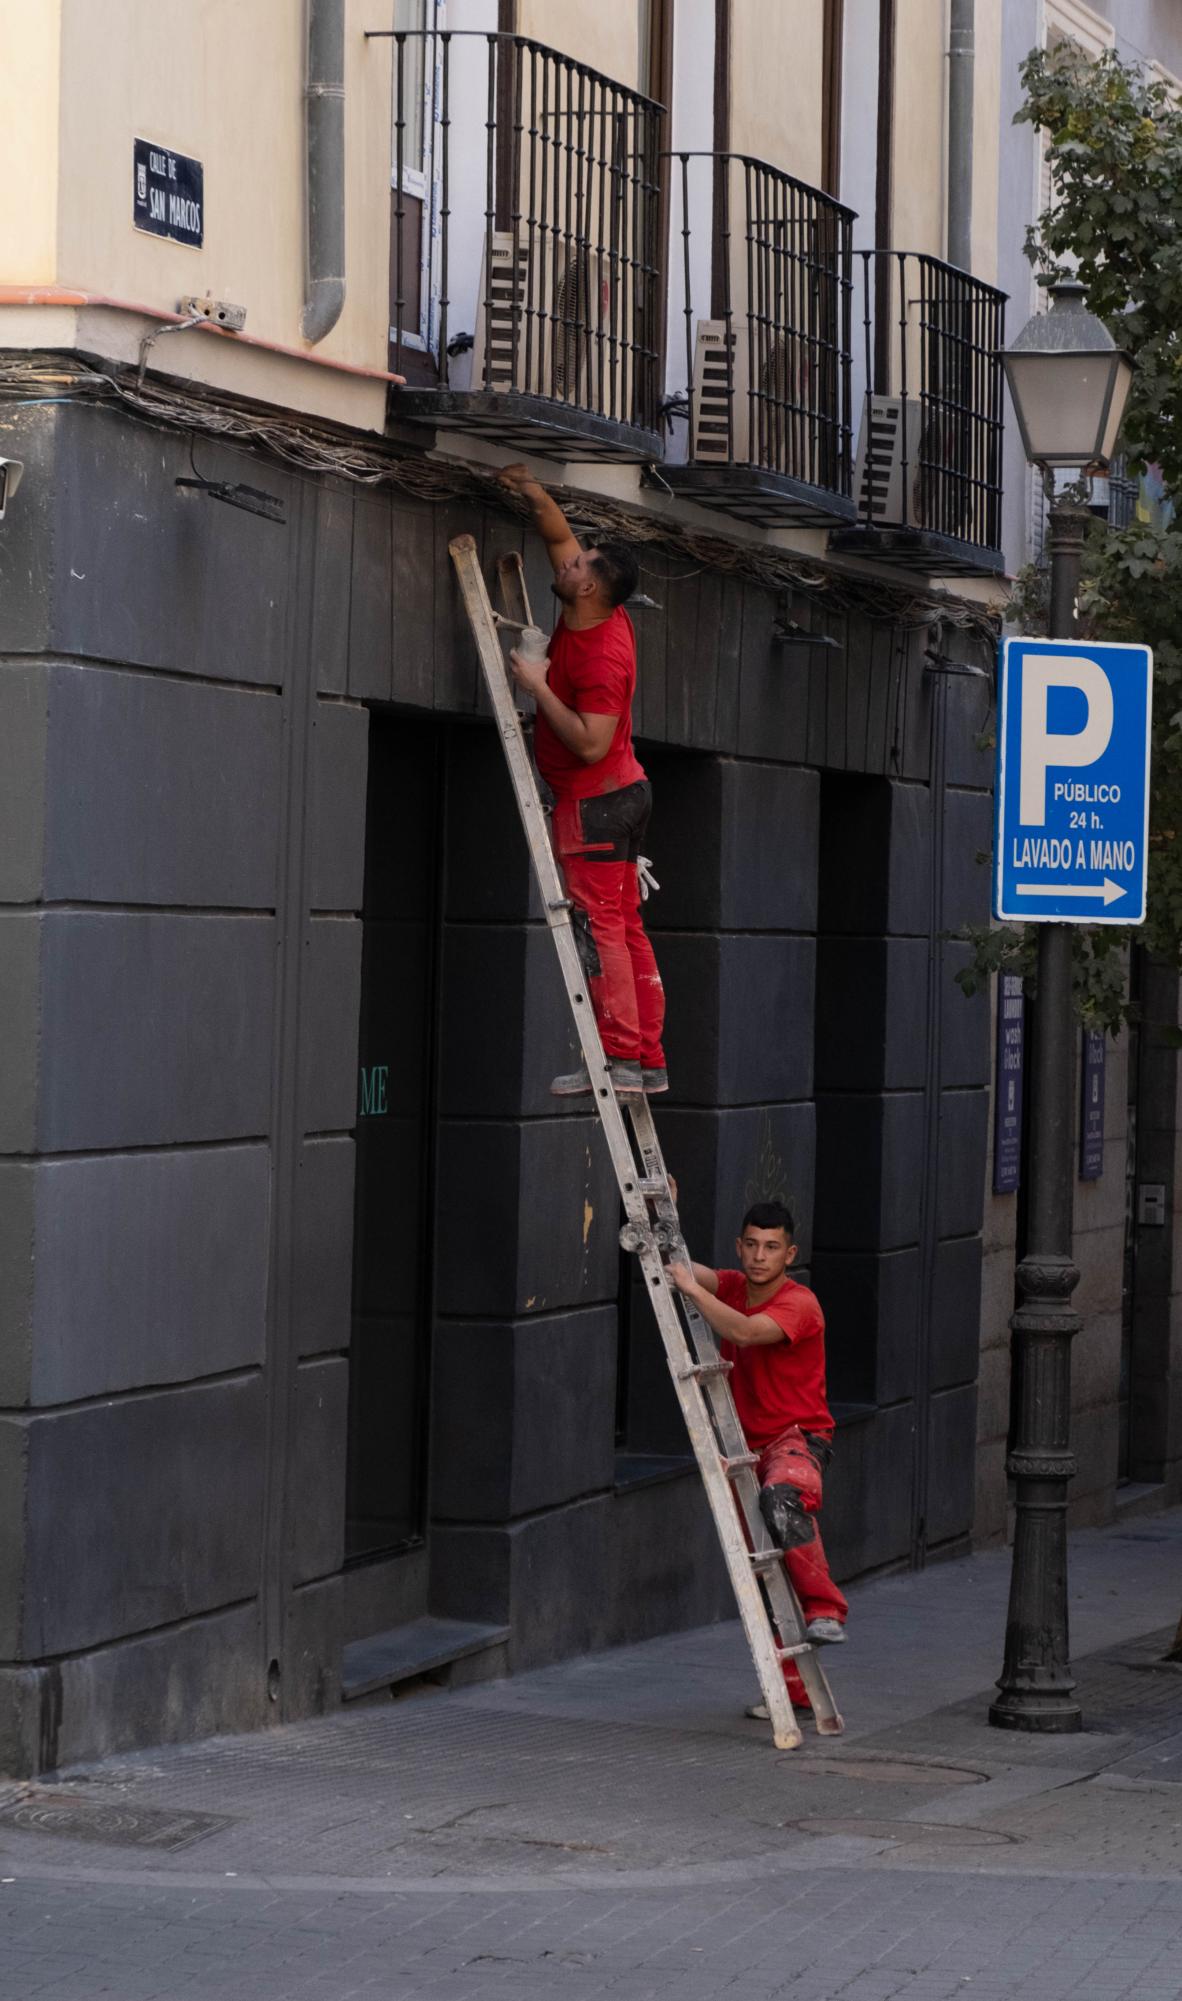 Two men paint a building in Chueca, Madrid.